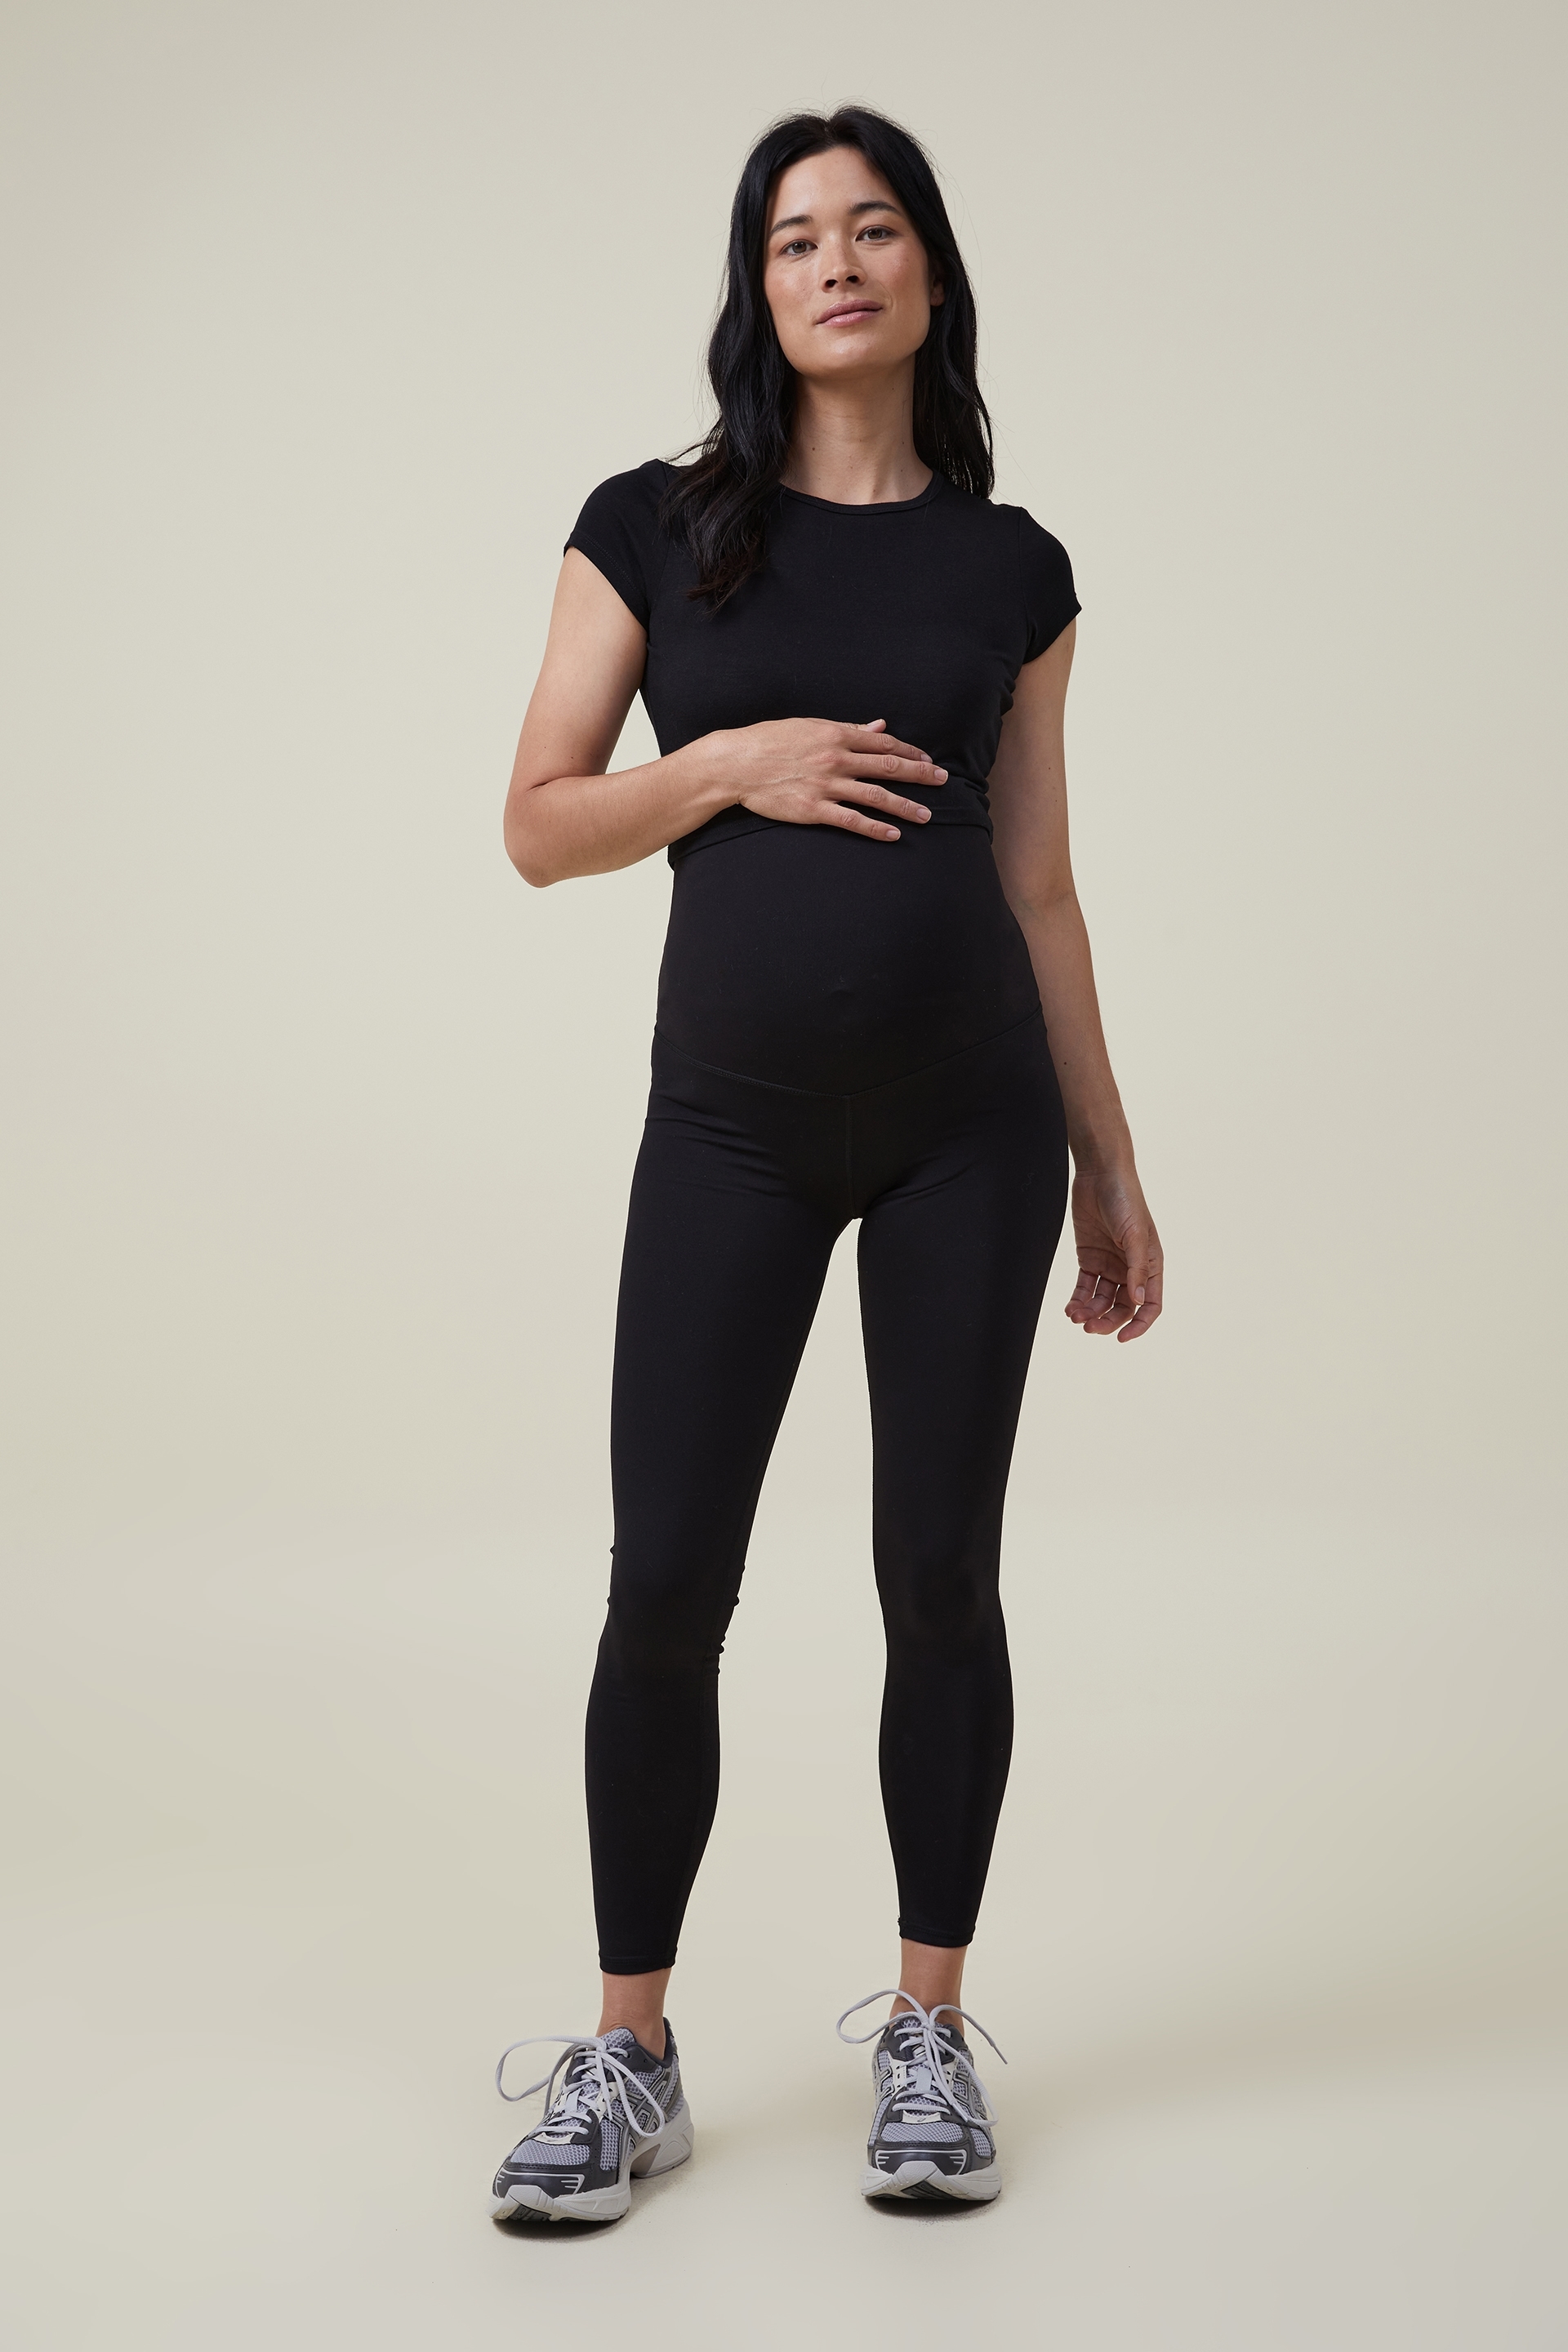 Maternity Core Tight Over Belly, Women's Lifestyle Fashion Brand